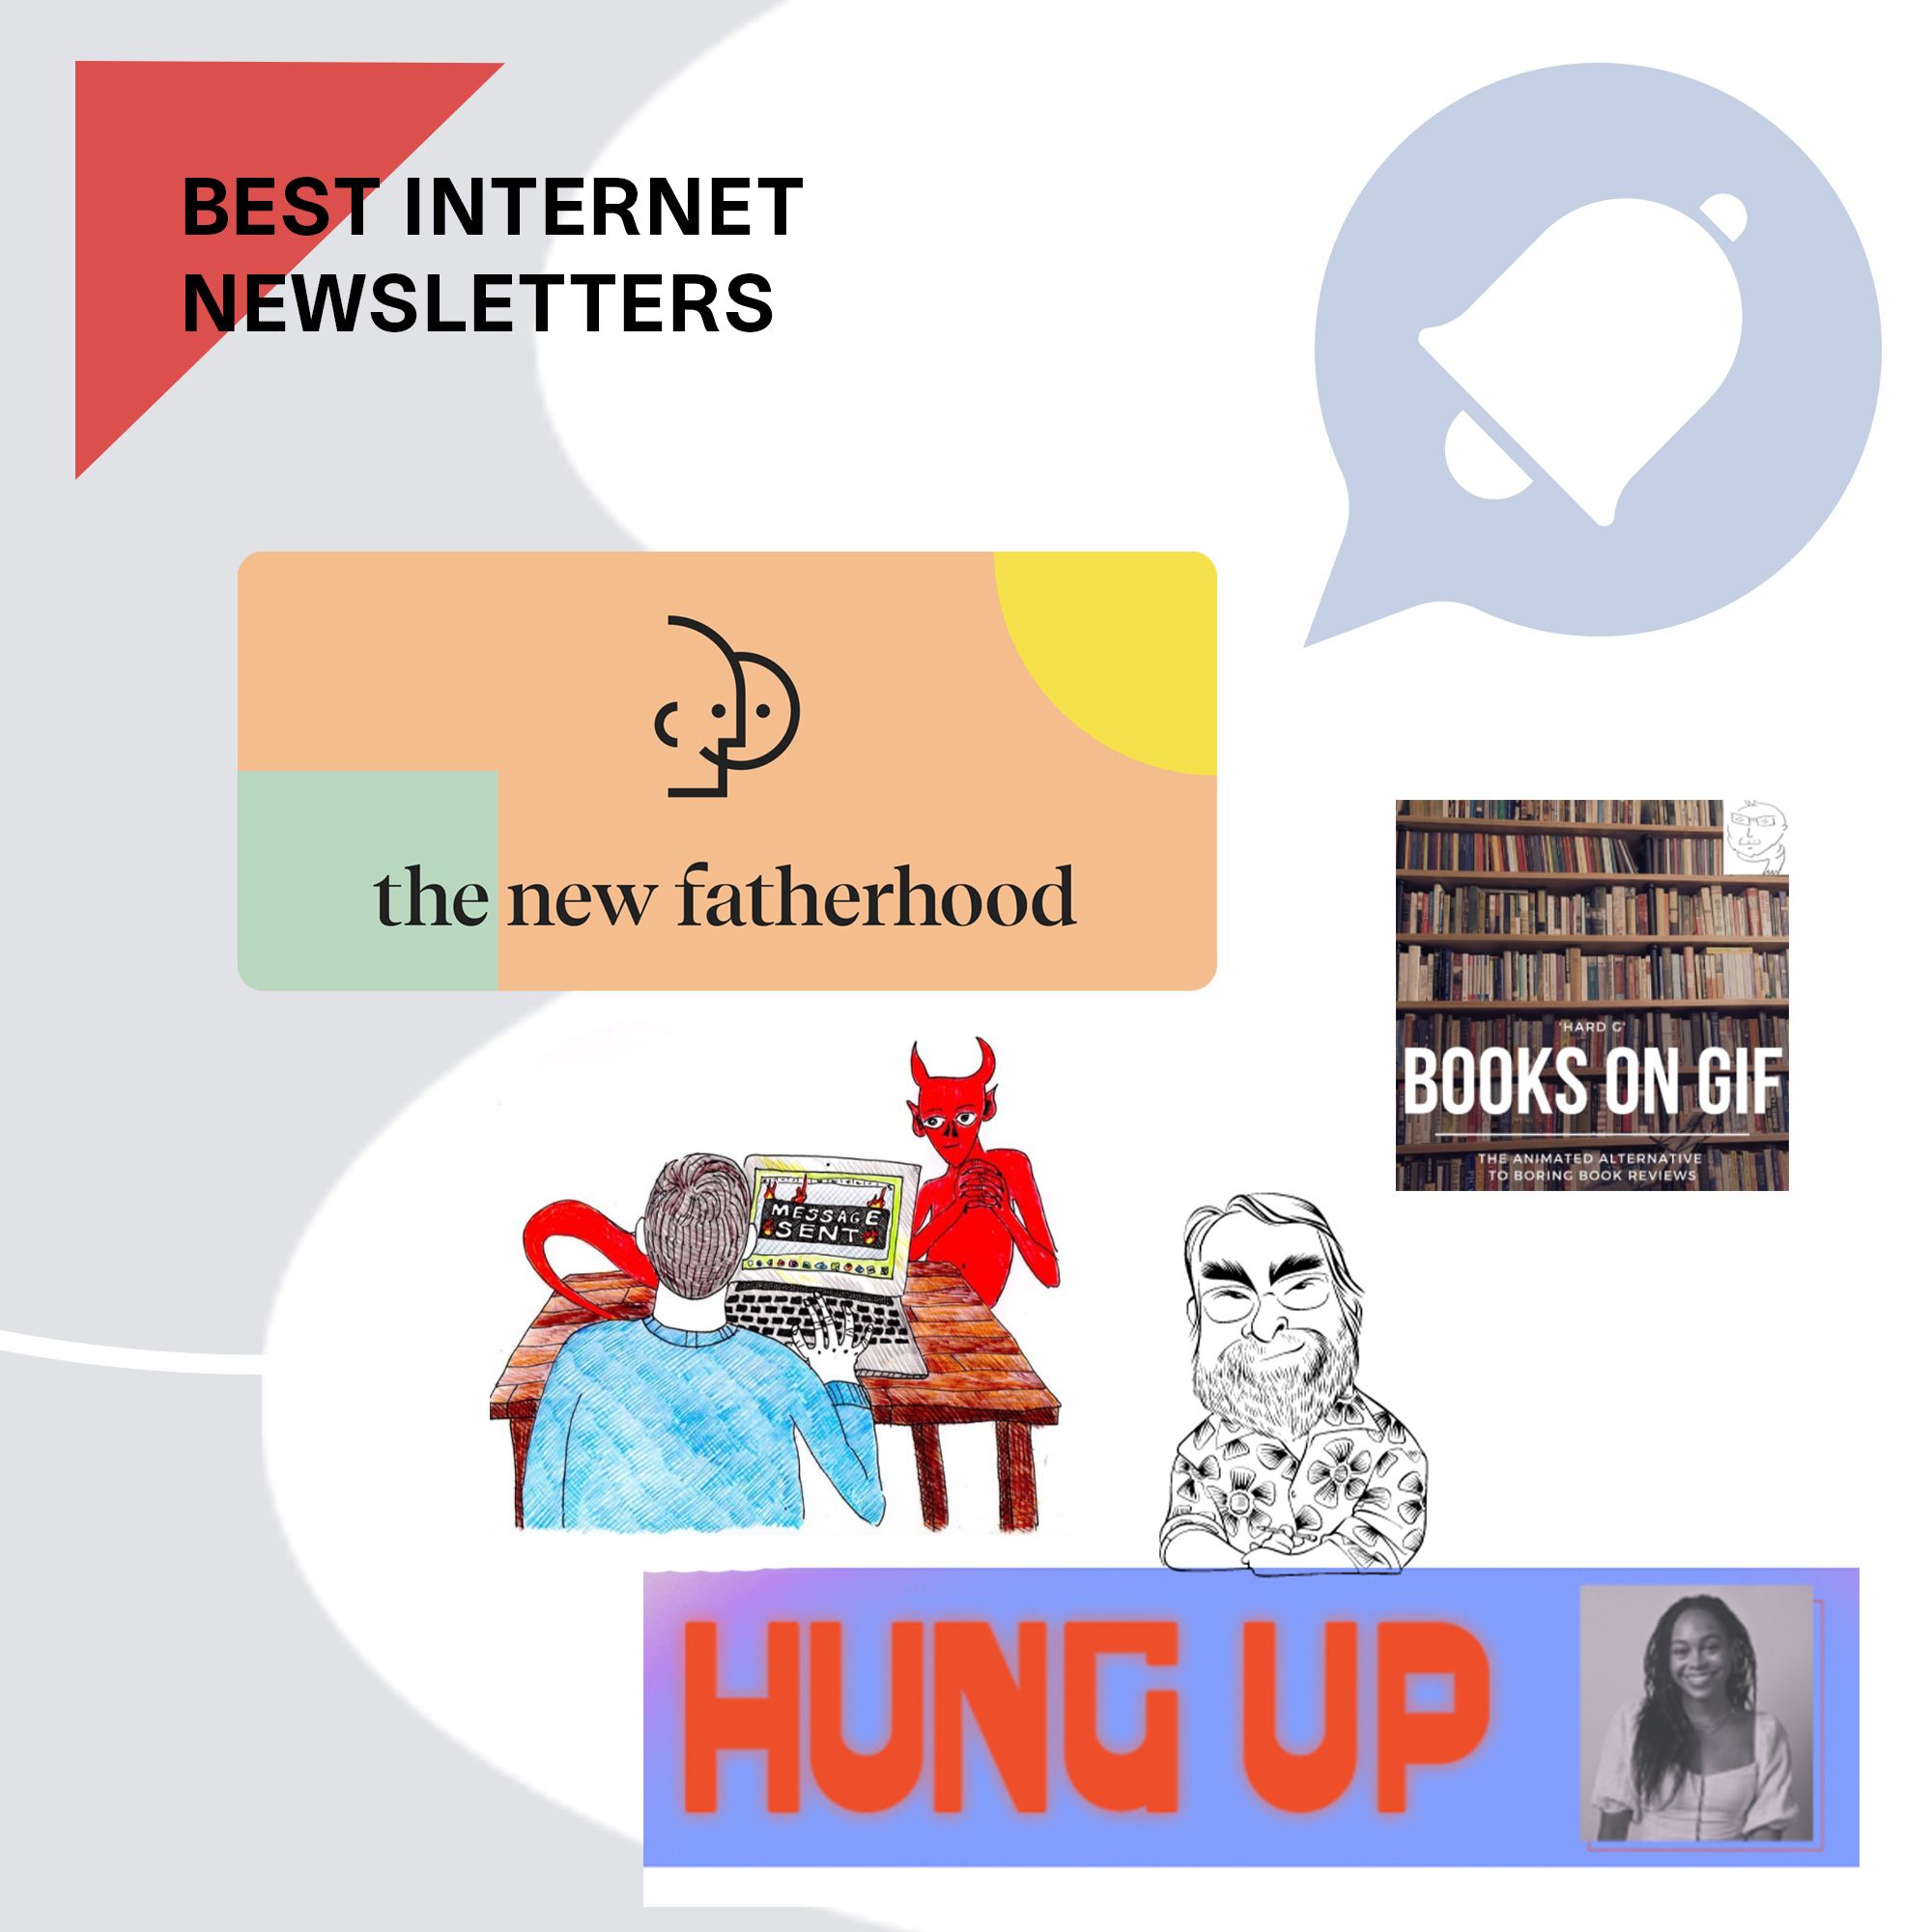 You've Got Mail: Our 10 Favorite Internet Newsletters